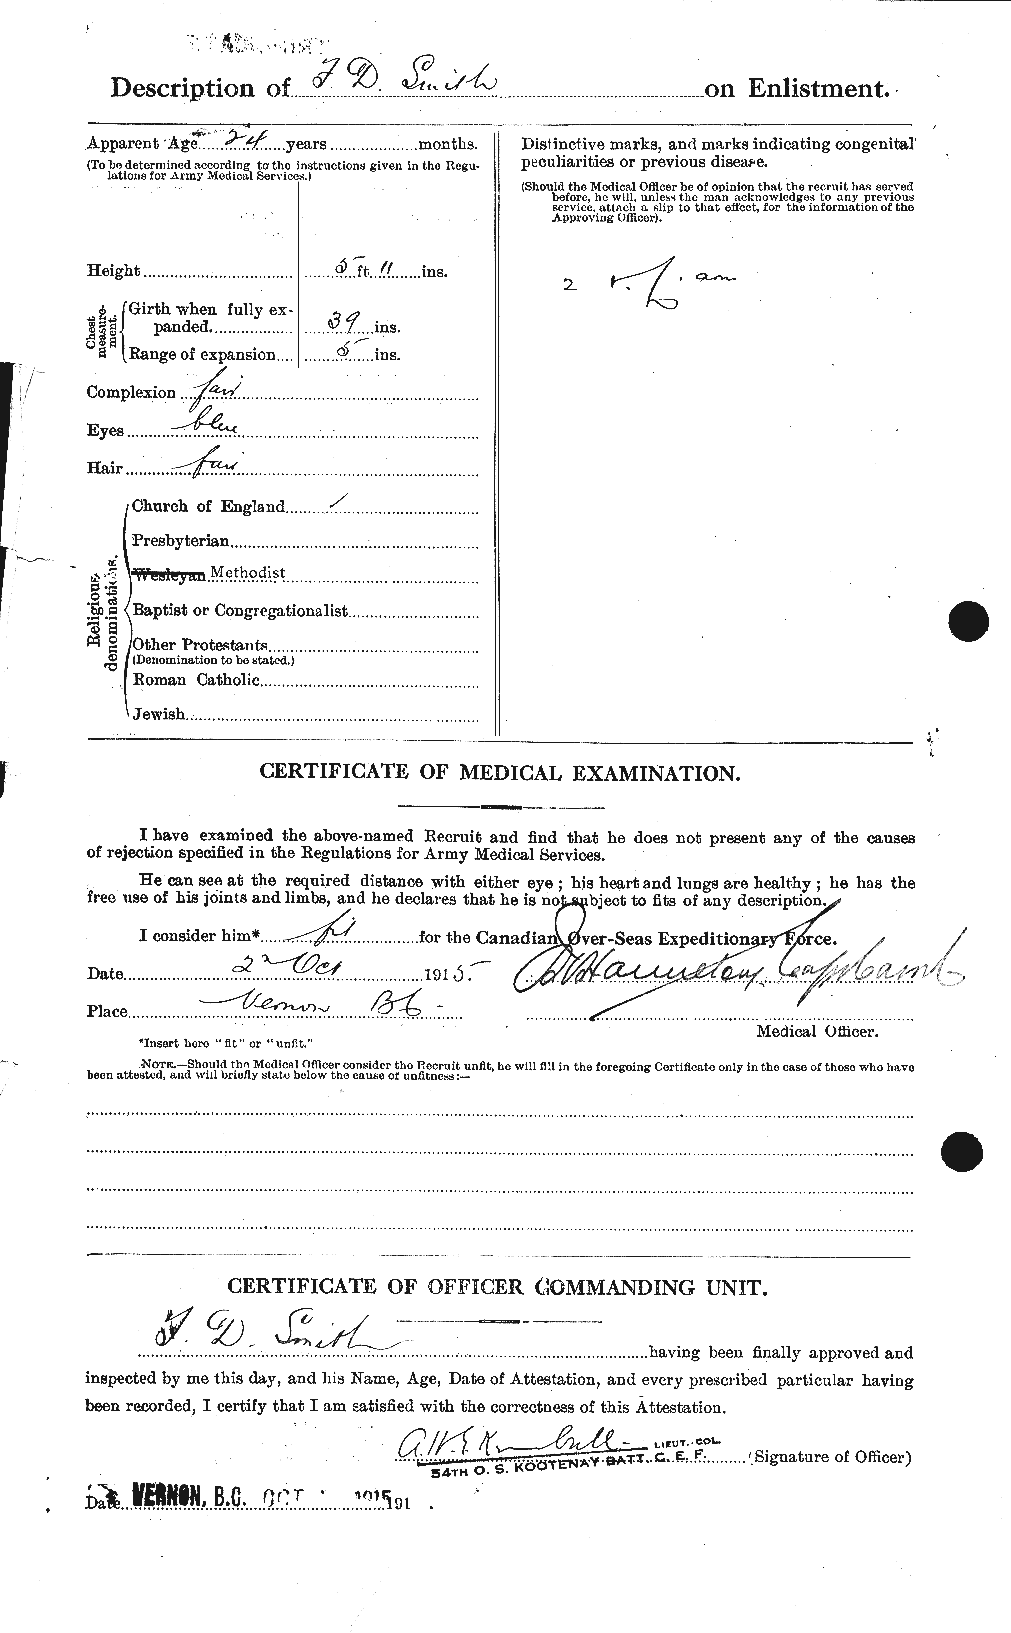 Personnel Records of the First World War - CEF 106787b